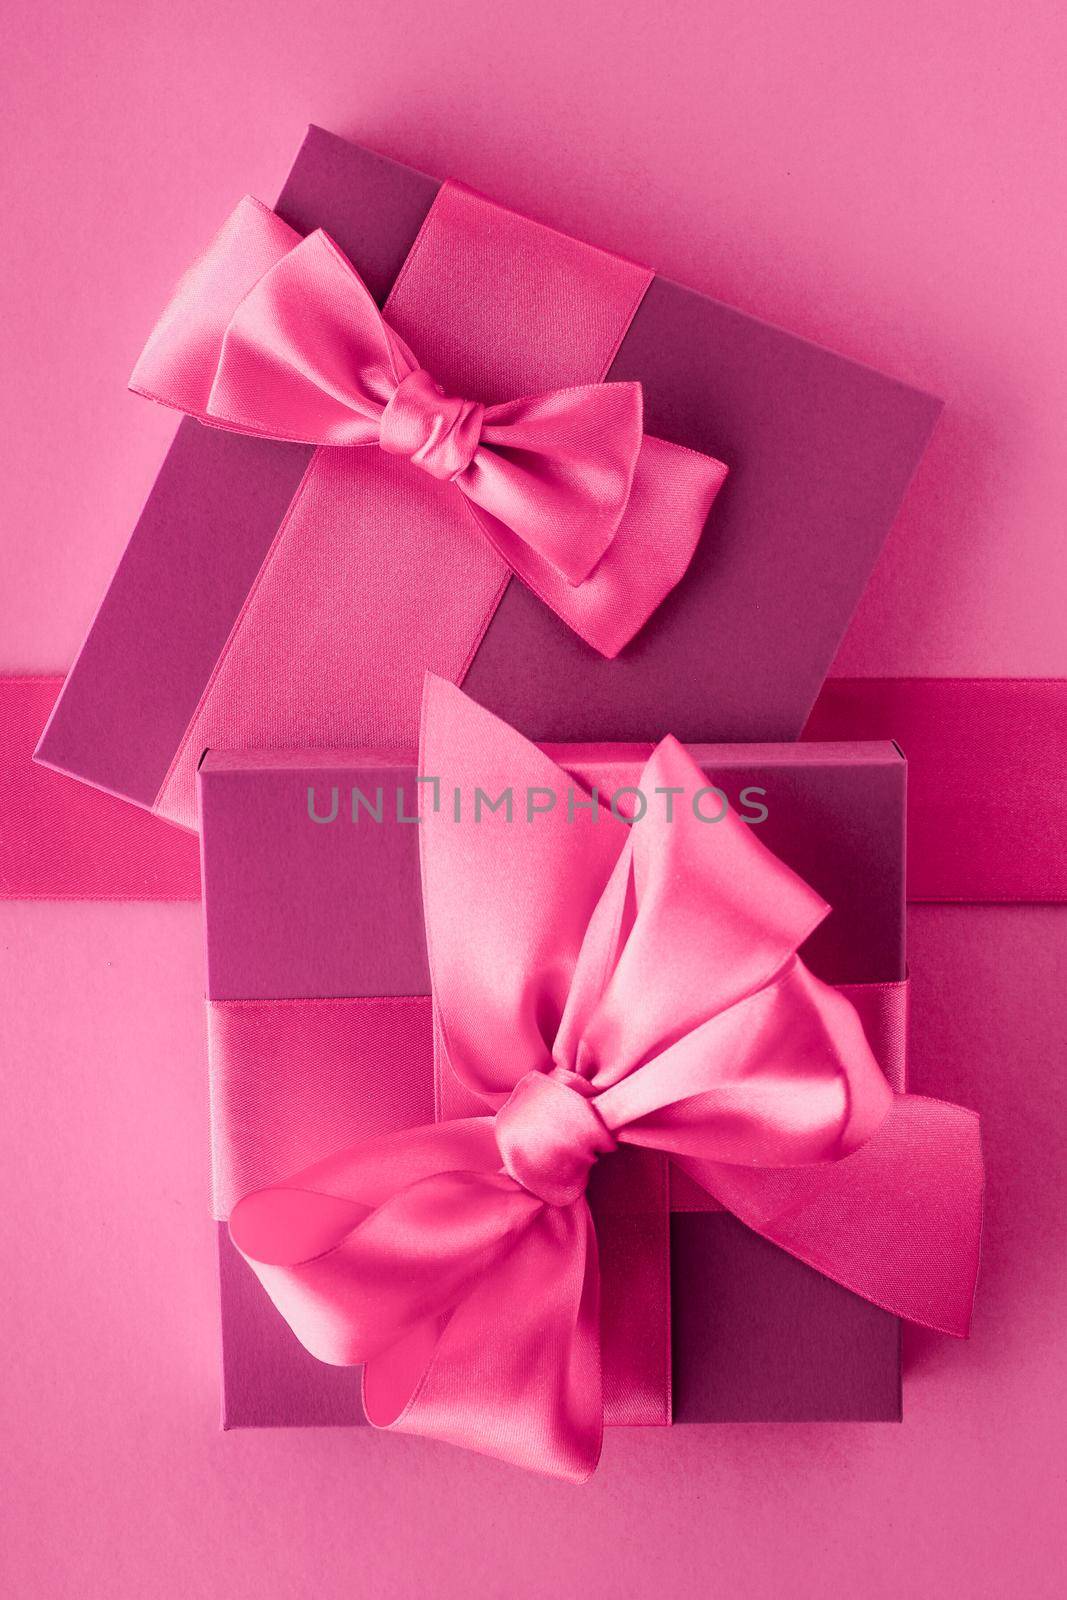 Pink gift boxes, feminine style flatlay background by Anneleven